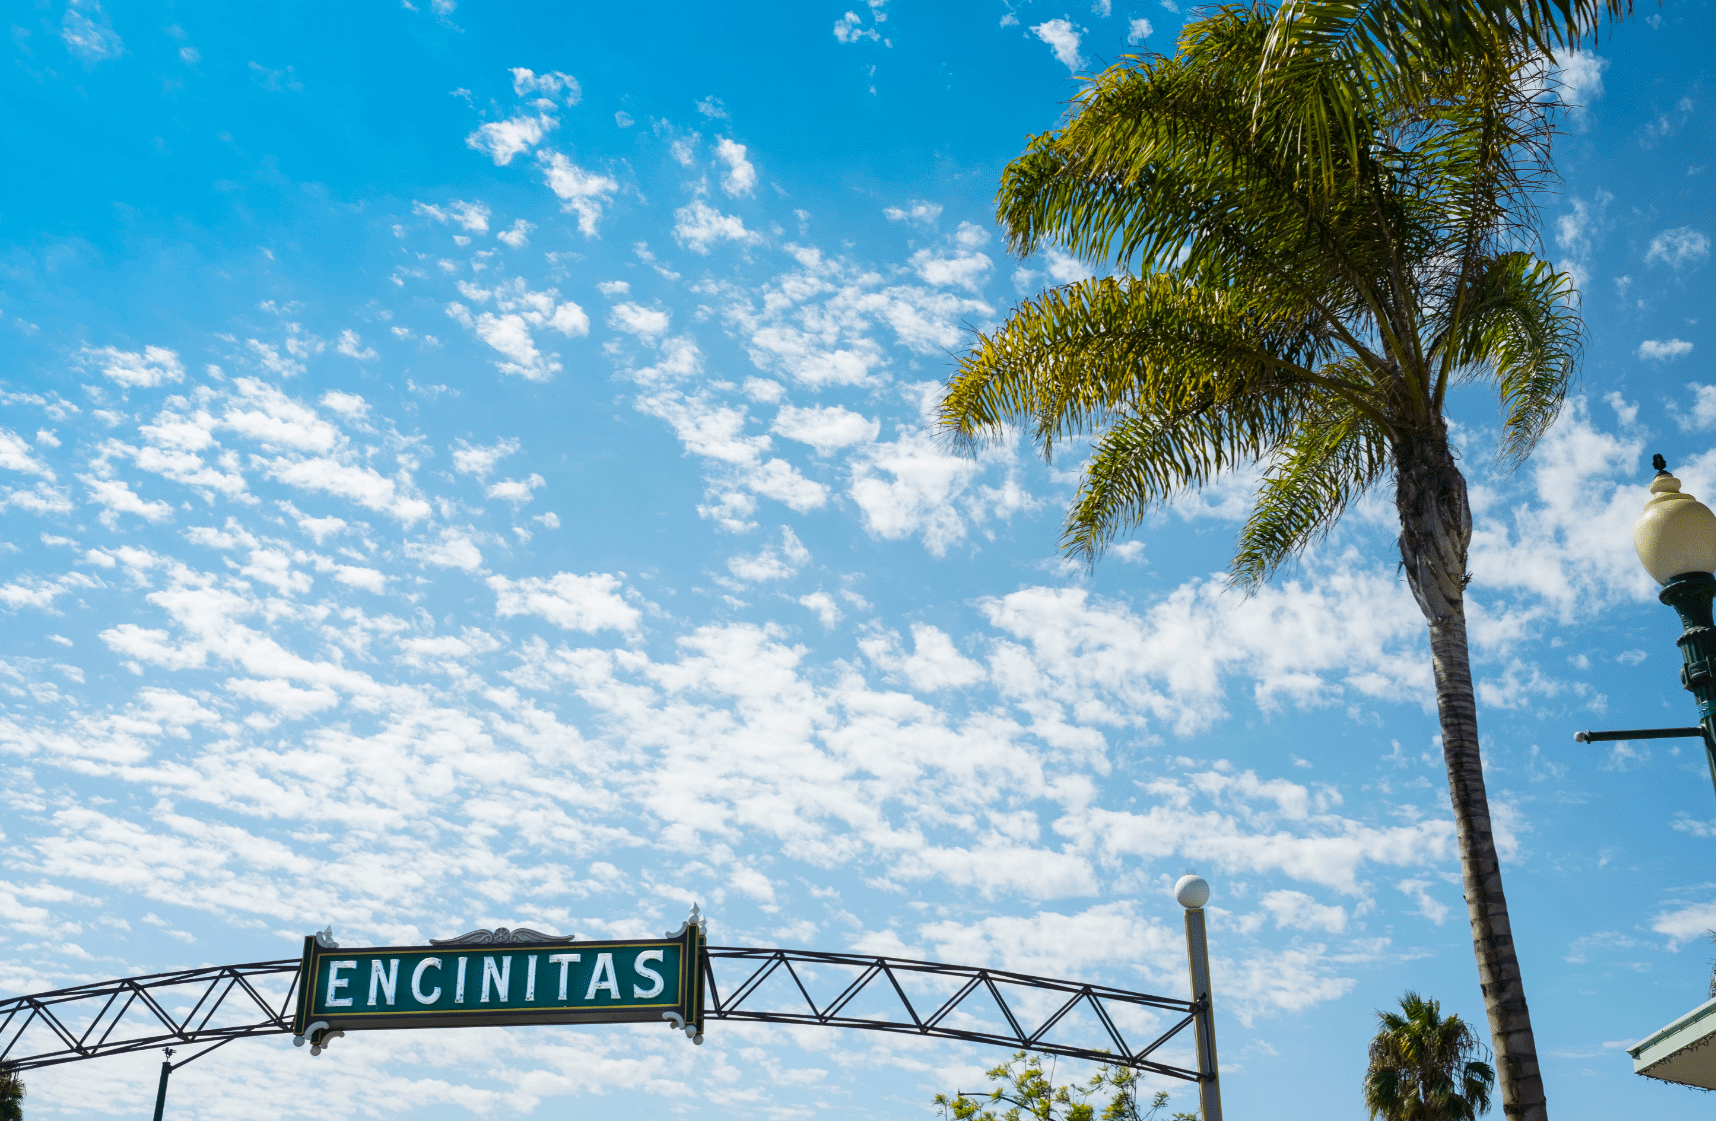 A Local’s Guide to a Perfect Day in Encinitas